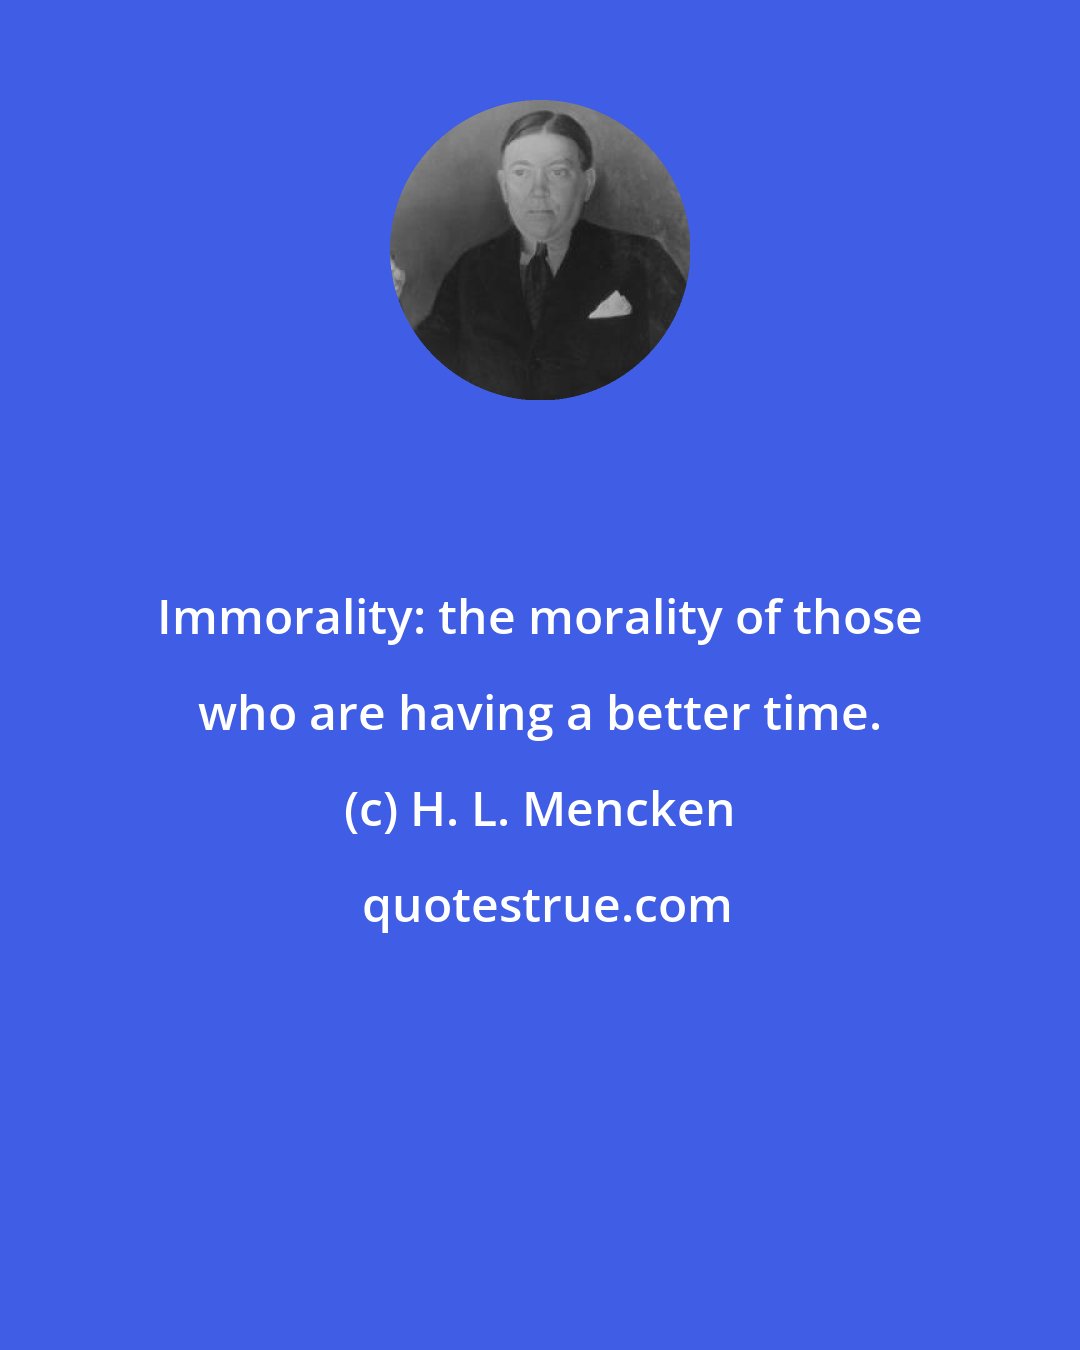 H. L. Mencken: Immorality: the morality of those who are having a better time.